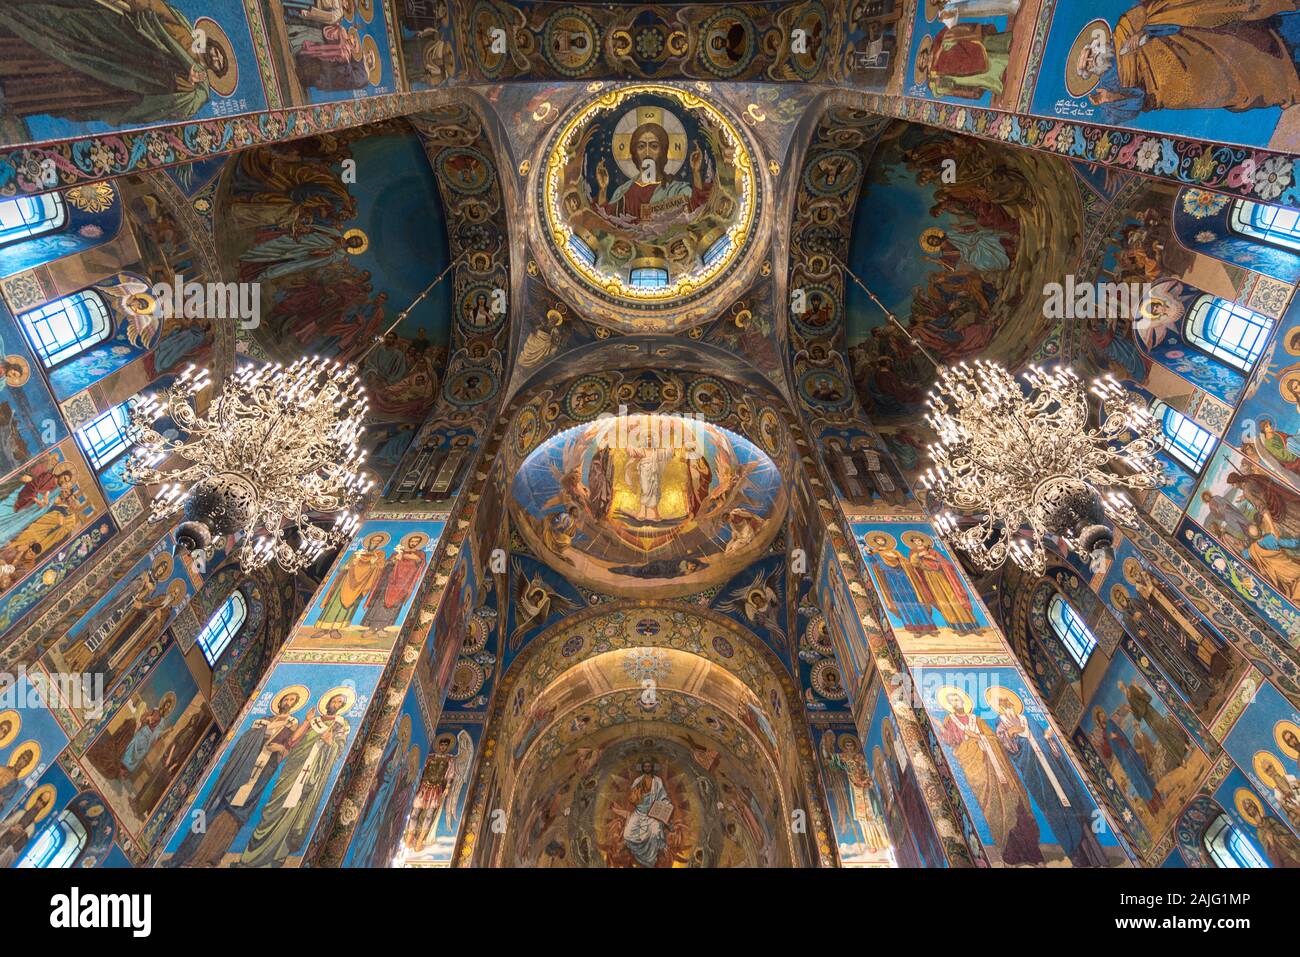 Saint Petersburg, Russia: Interior of Church of the Savior on Blood (spilled blood) is one of the main sights of St Petersburg, wide angle view Stock Photo